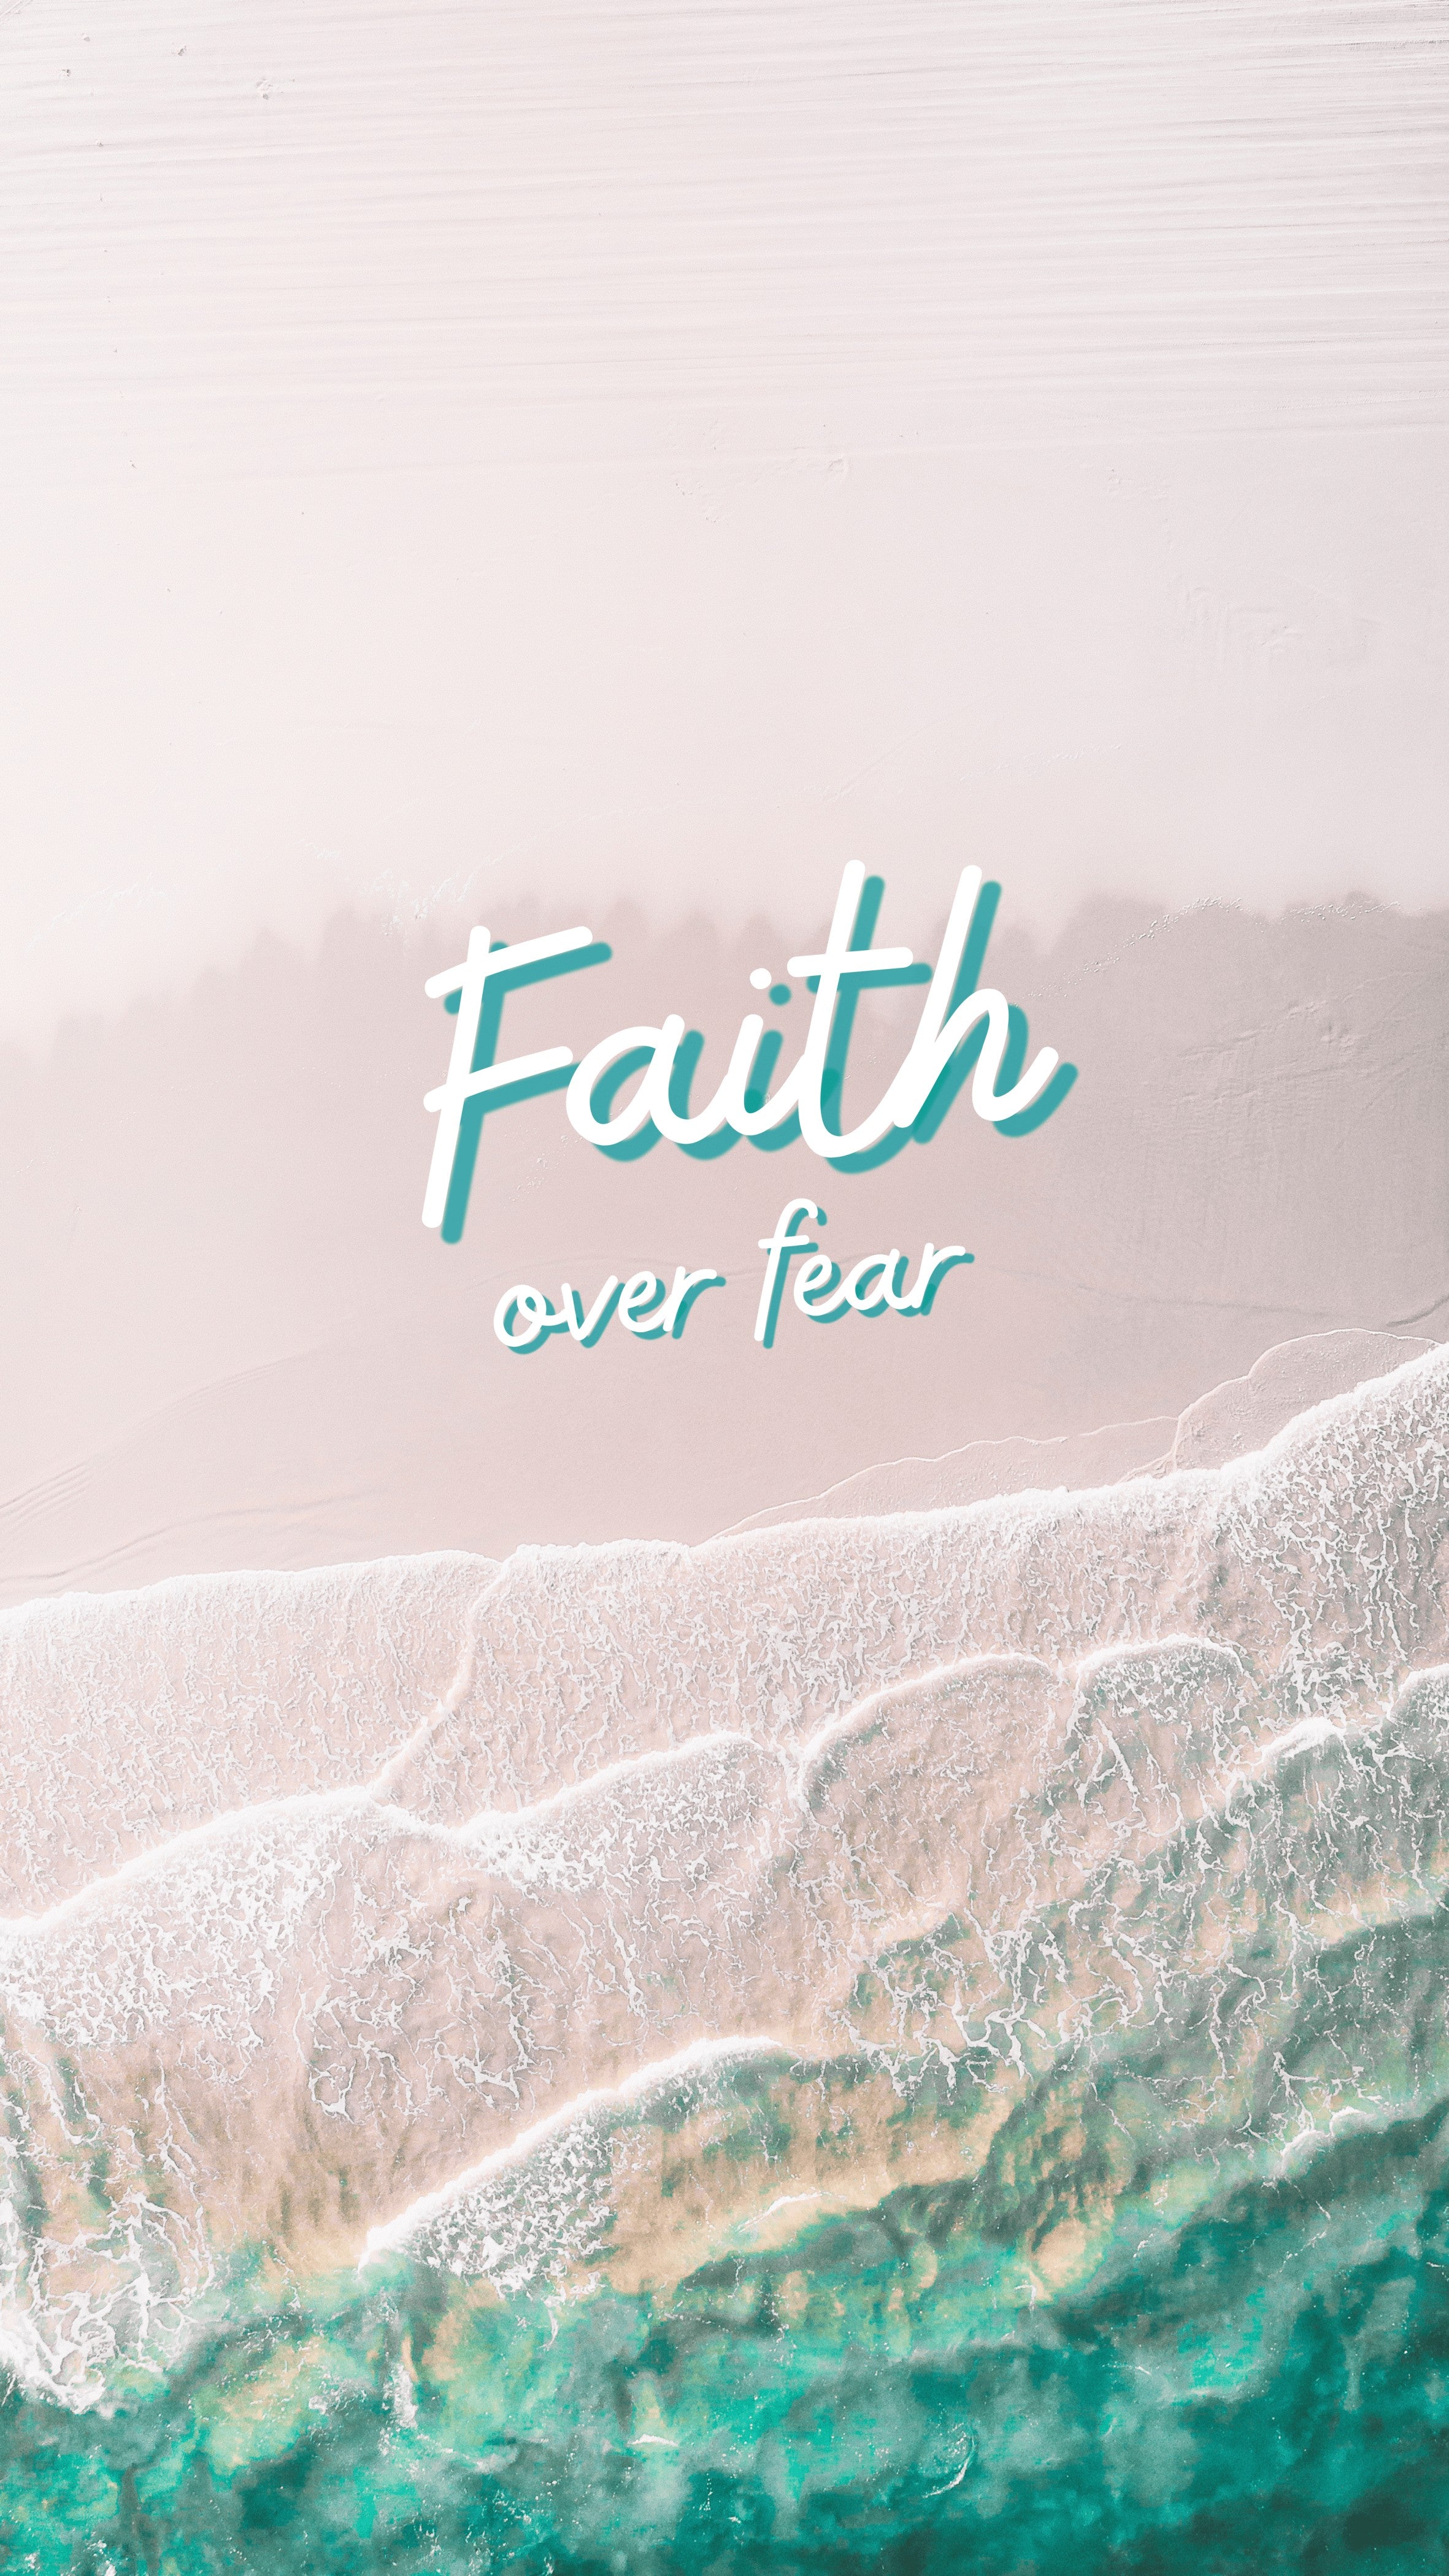 Mobile Wallpapers - FREE Download - Believers4ever.com